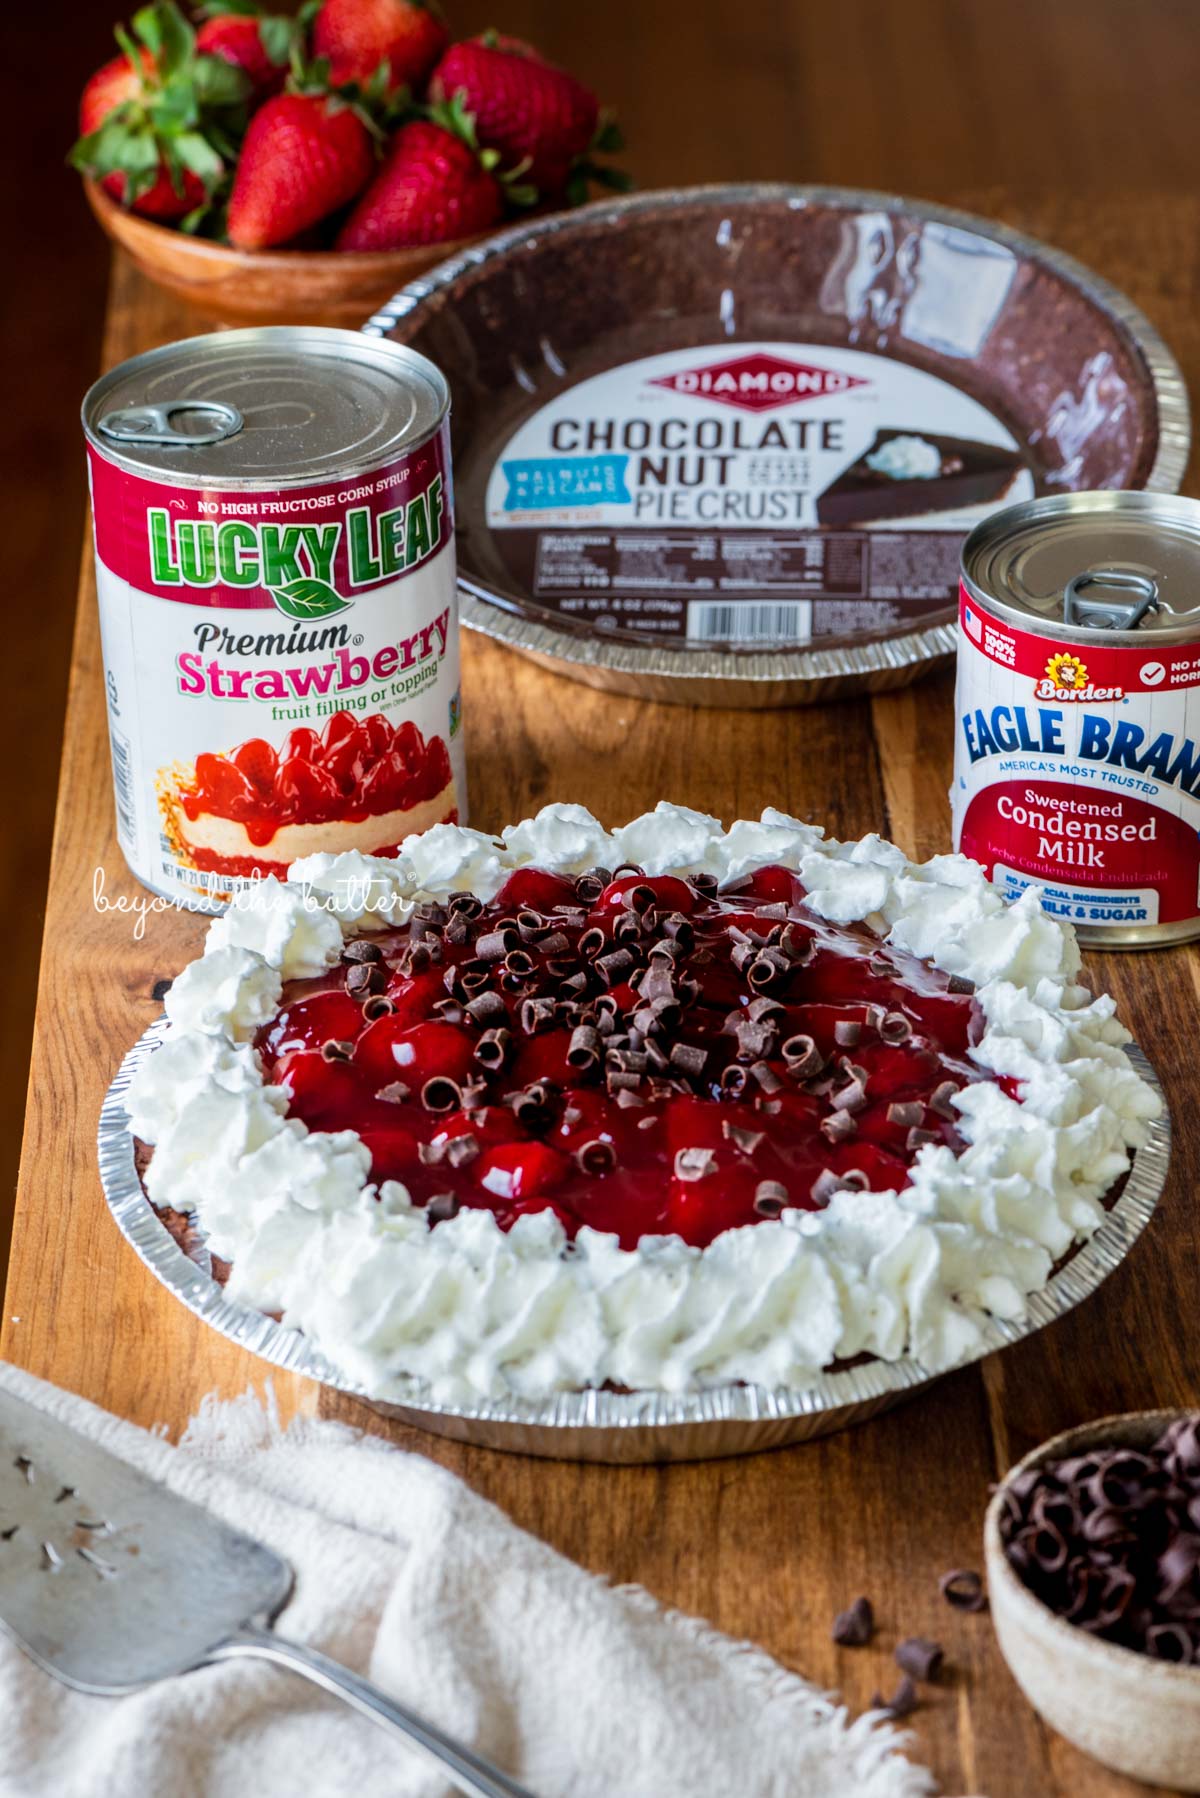 Diamond of CA® chocolate nut pie crust, Lucky Leaf® strawberry pie filling, and Eagle Brand® sweetened condensed milk with decorated no bake strawberry chocolate pie with small bowl of chocolate curls and strawberries on wood table | All images © Beyond the Butter®